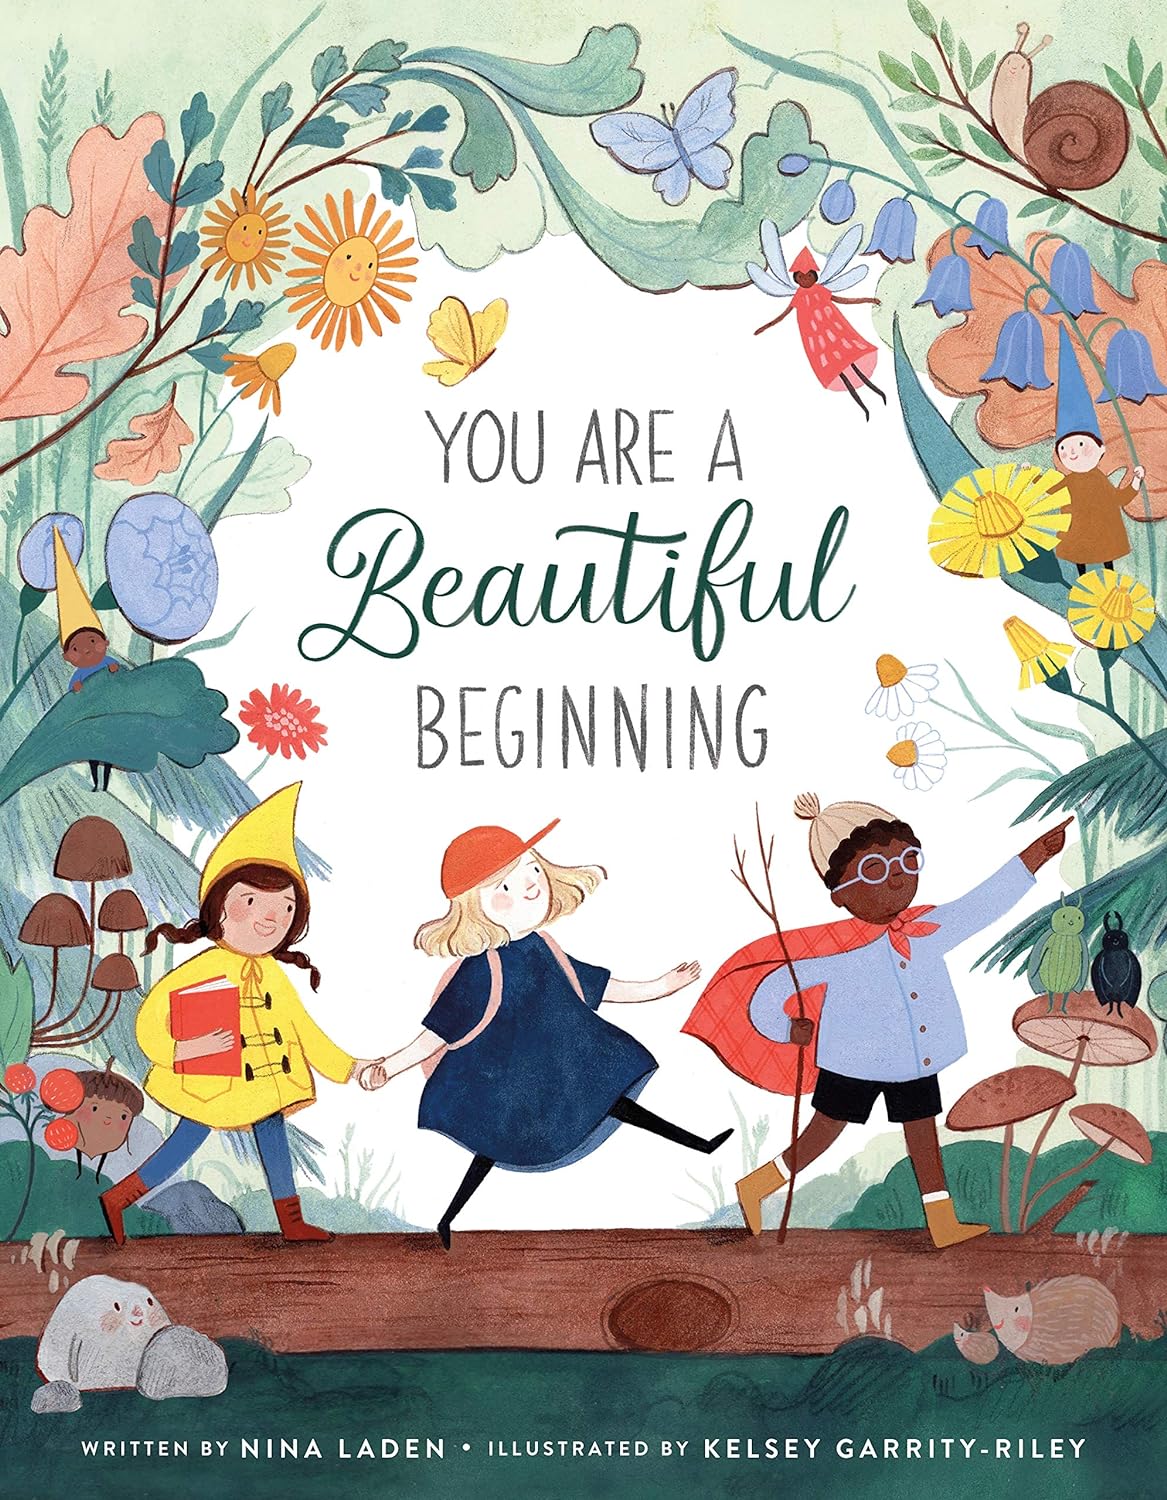 You Are a Beautiful Beginning